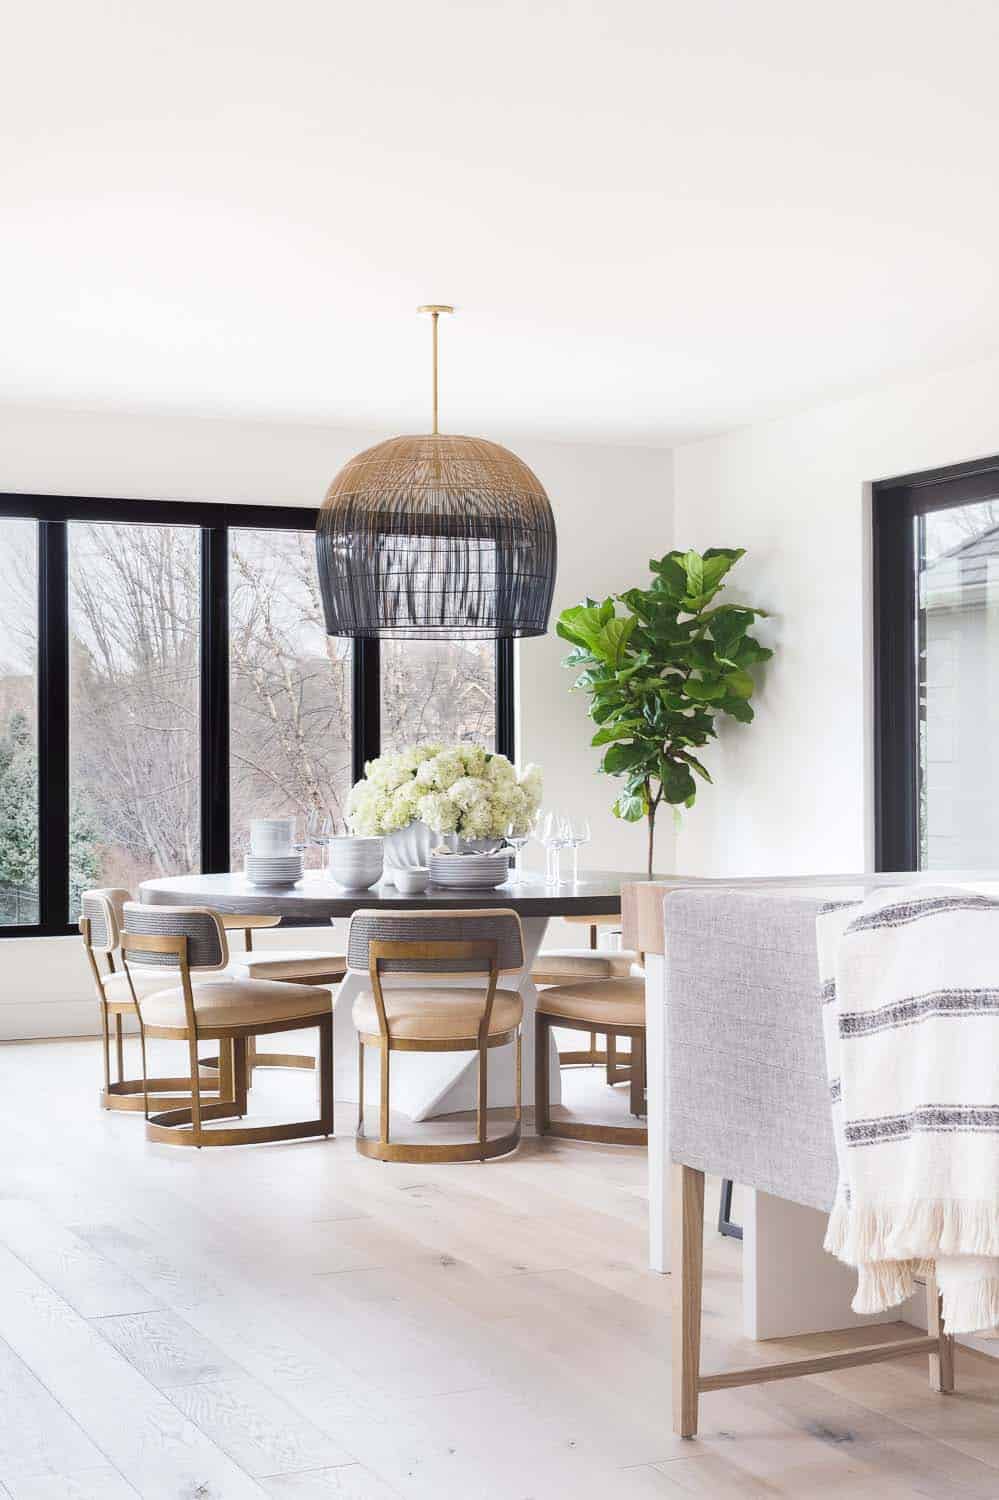 transitional style breakfast nook with sliding glass doors